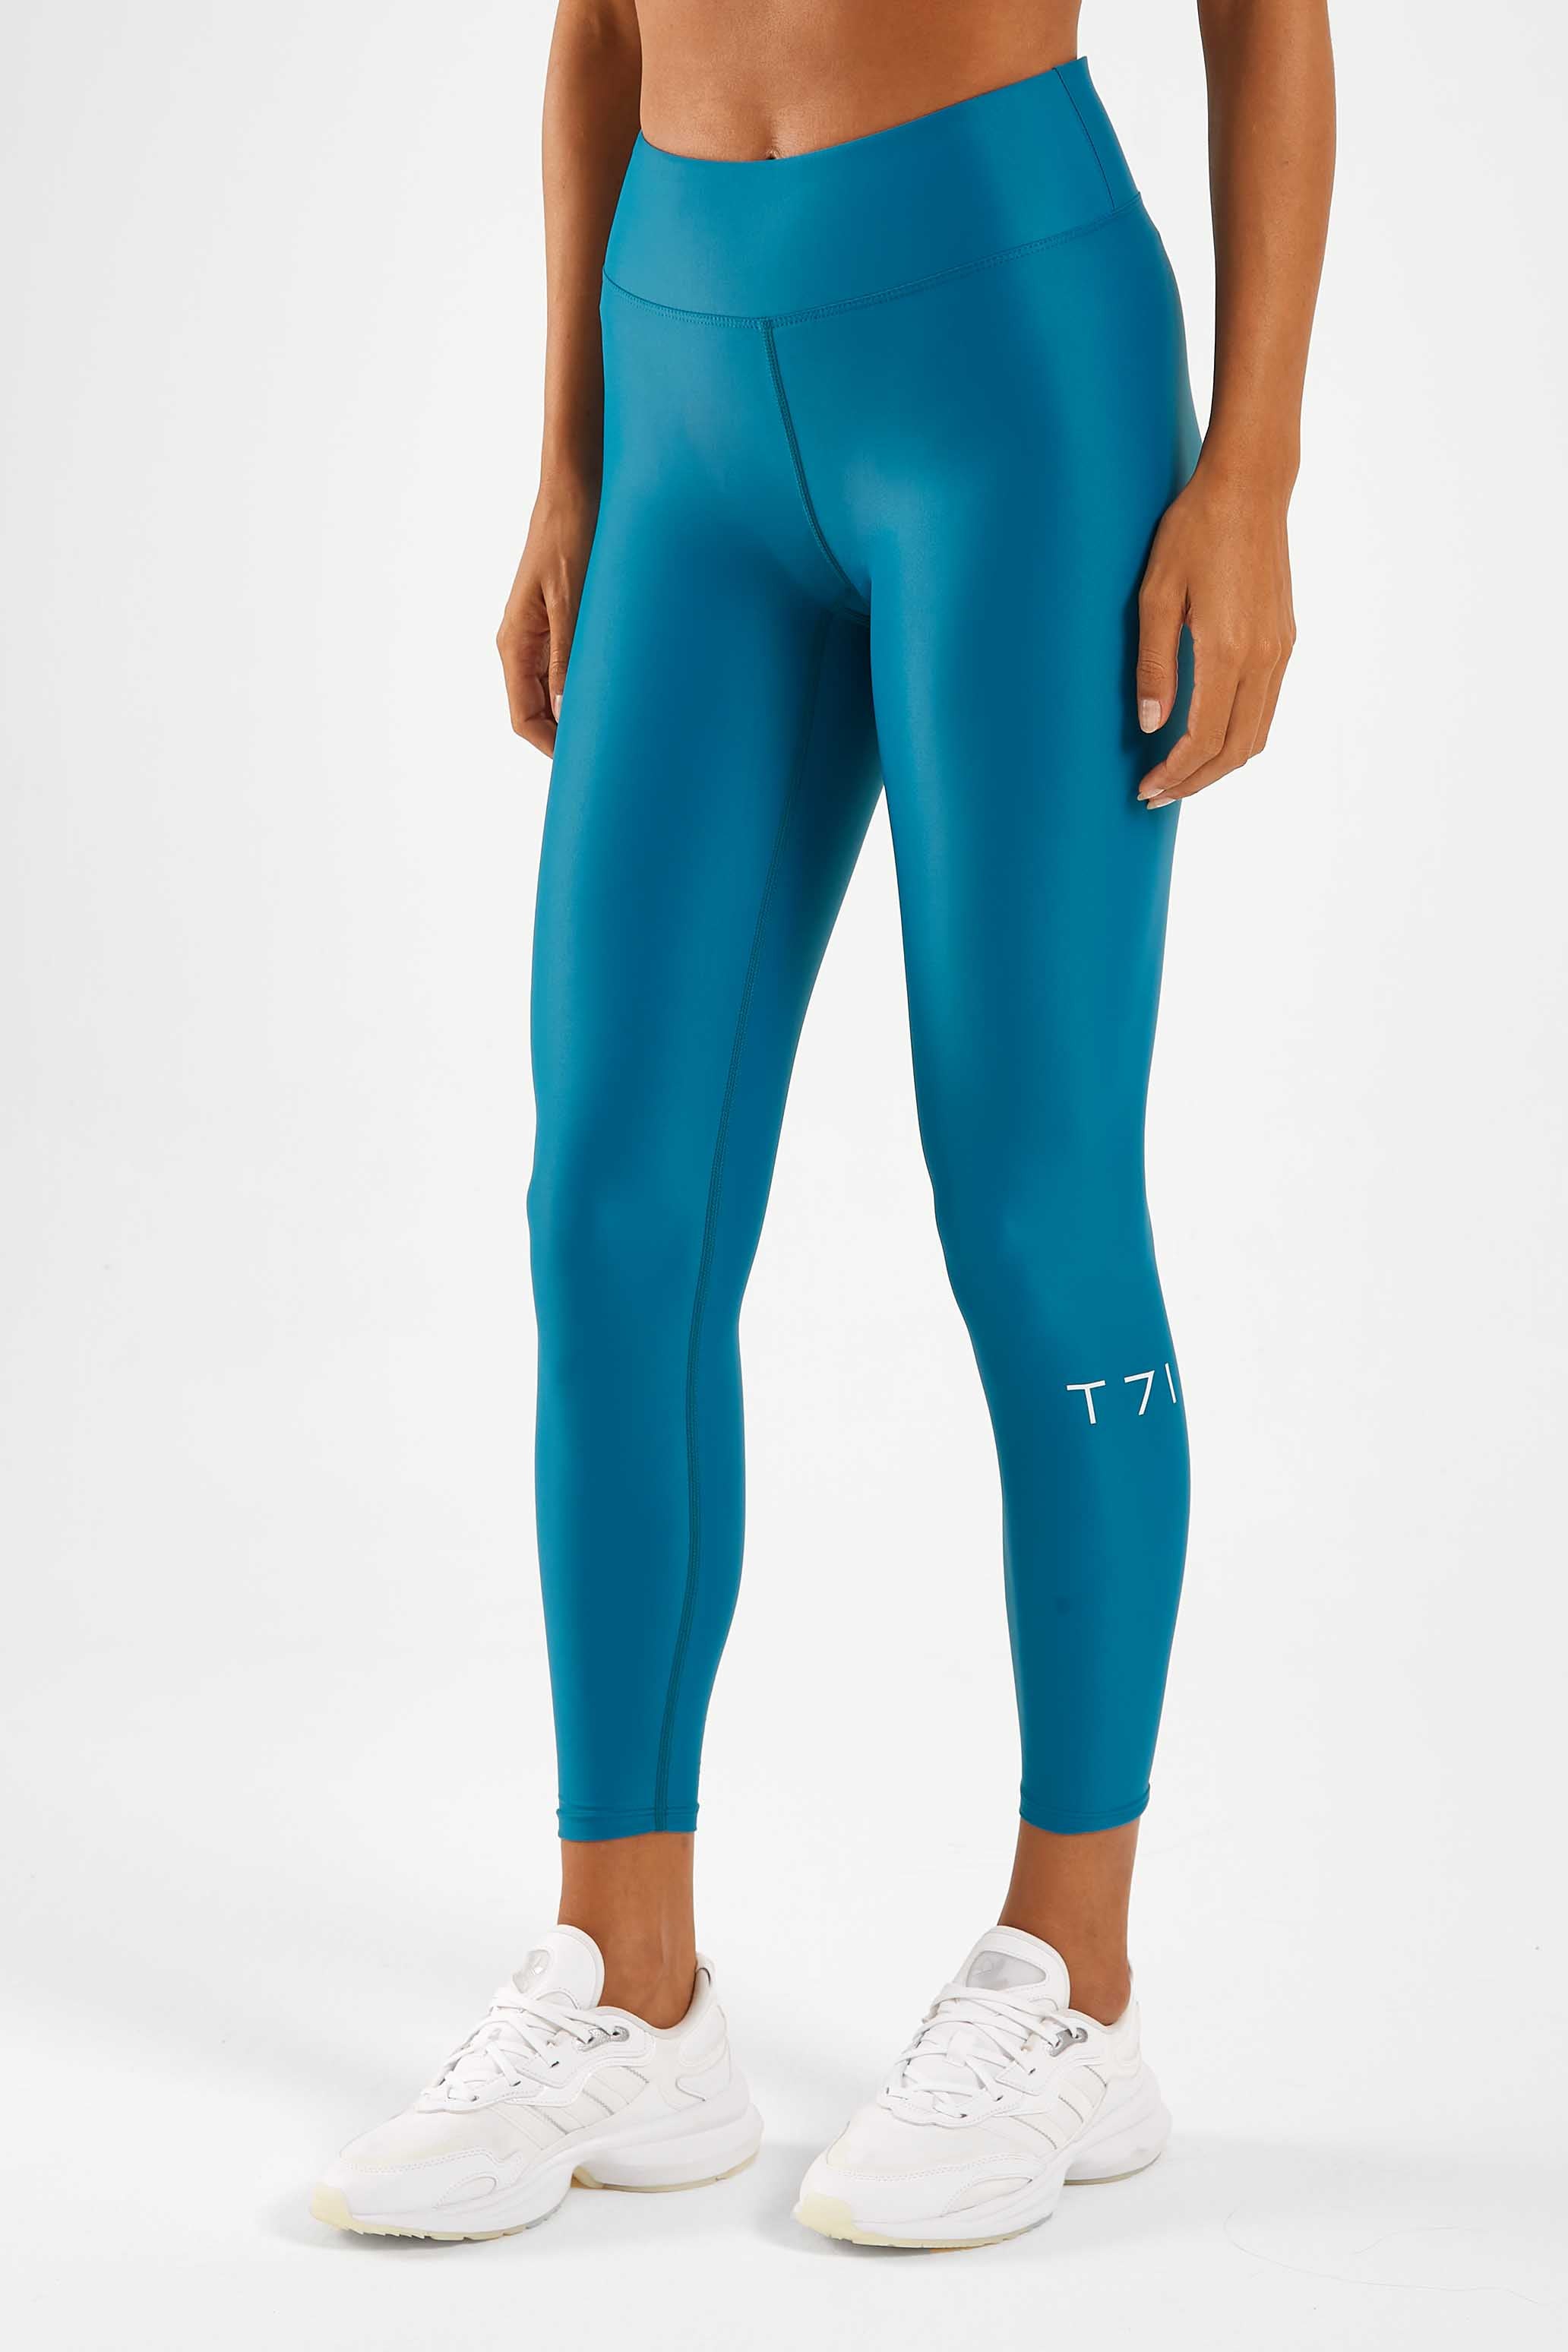 Shop Heroine Sport collection for women online – Tribe71